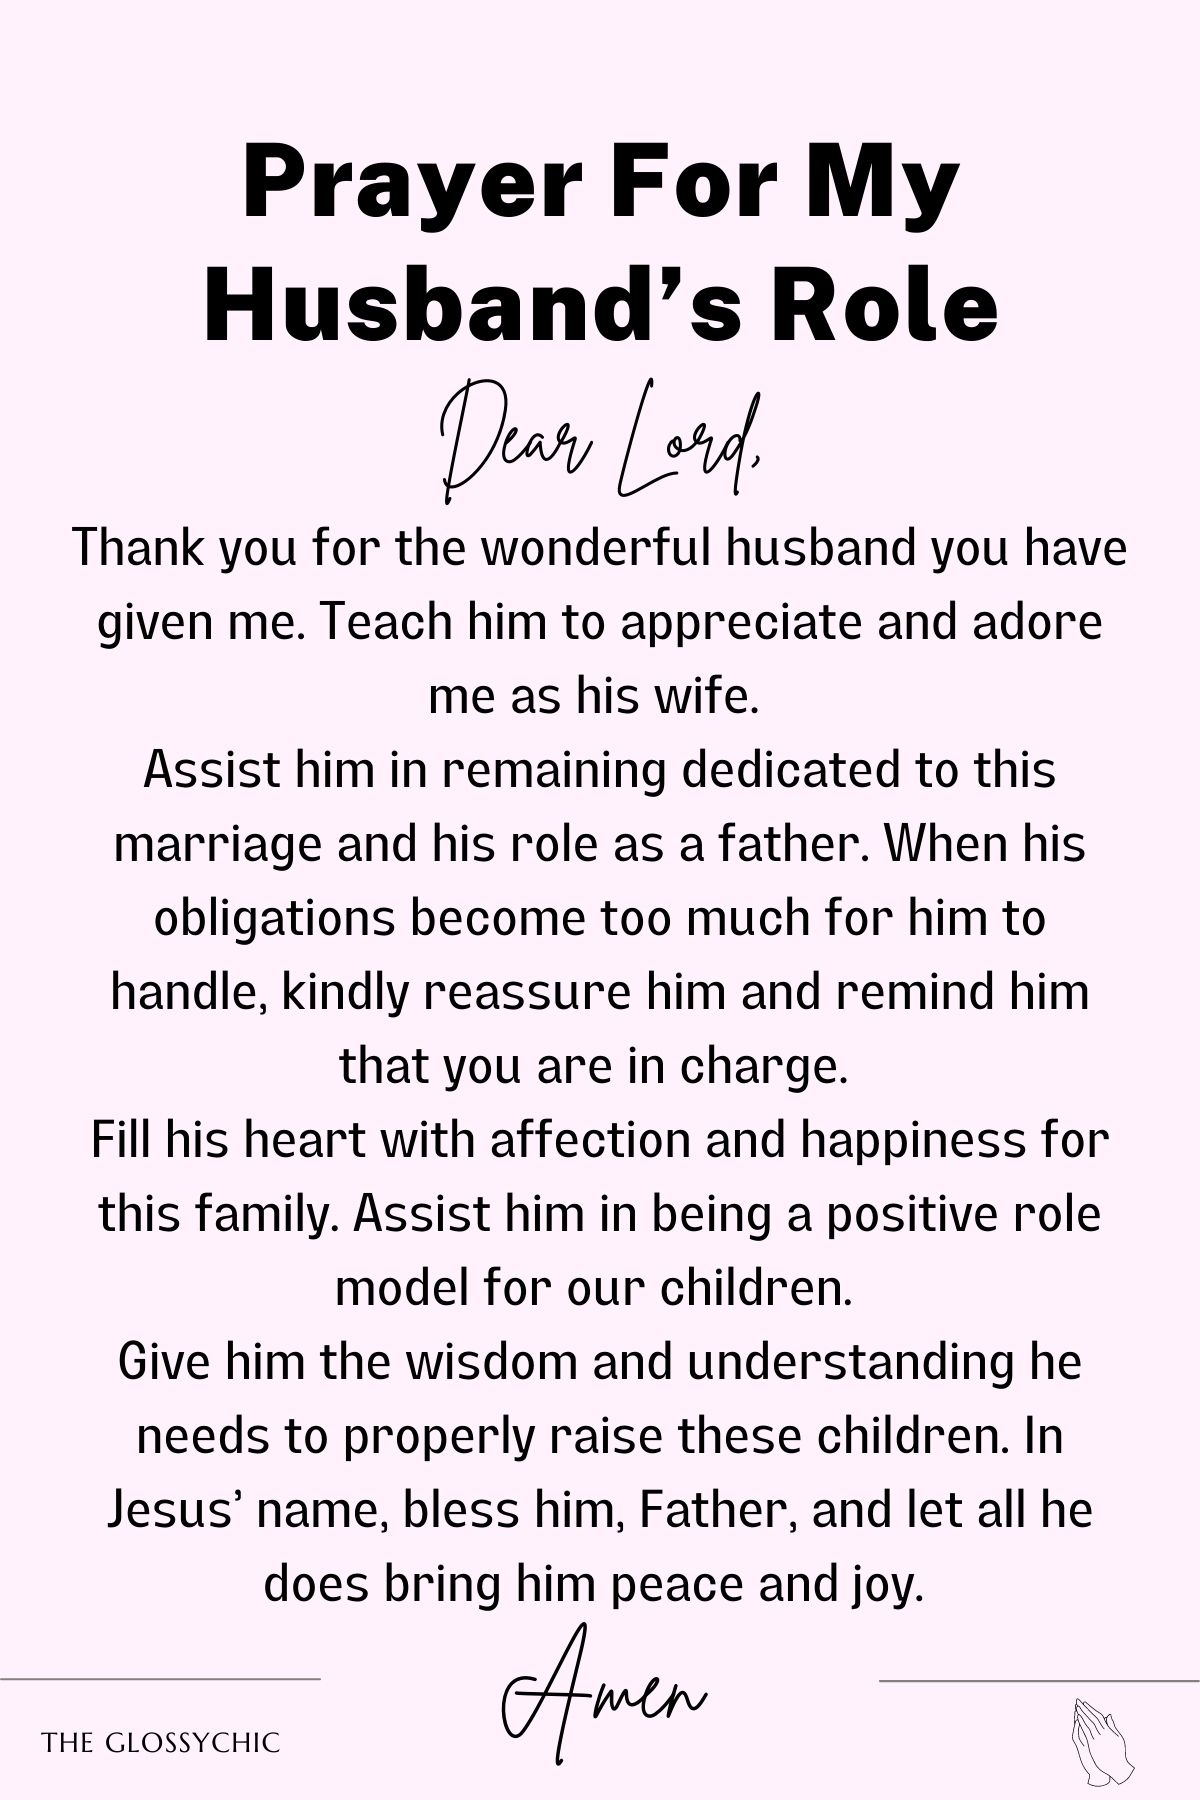 Prayer for my husband’s role